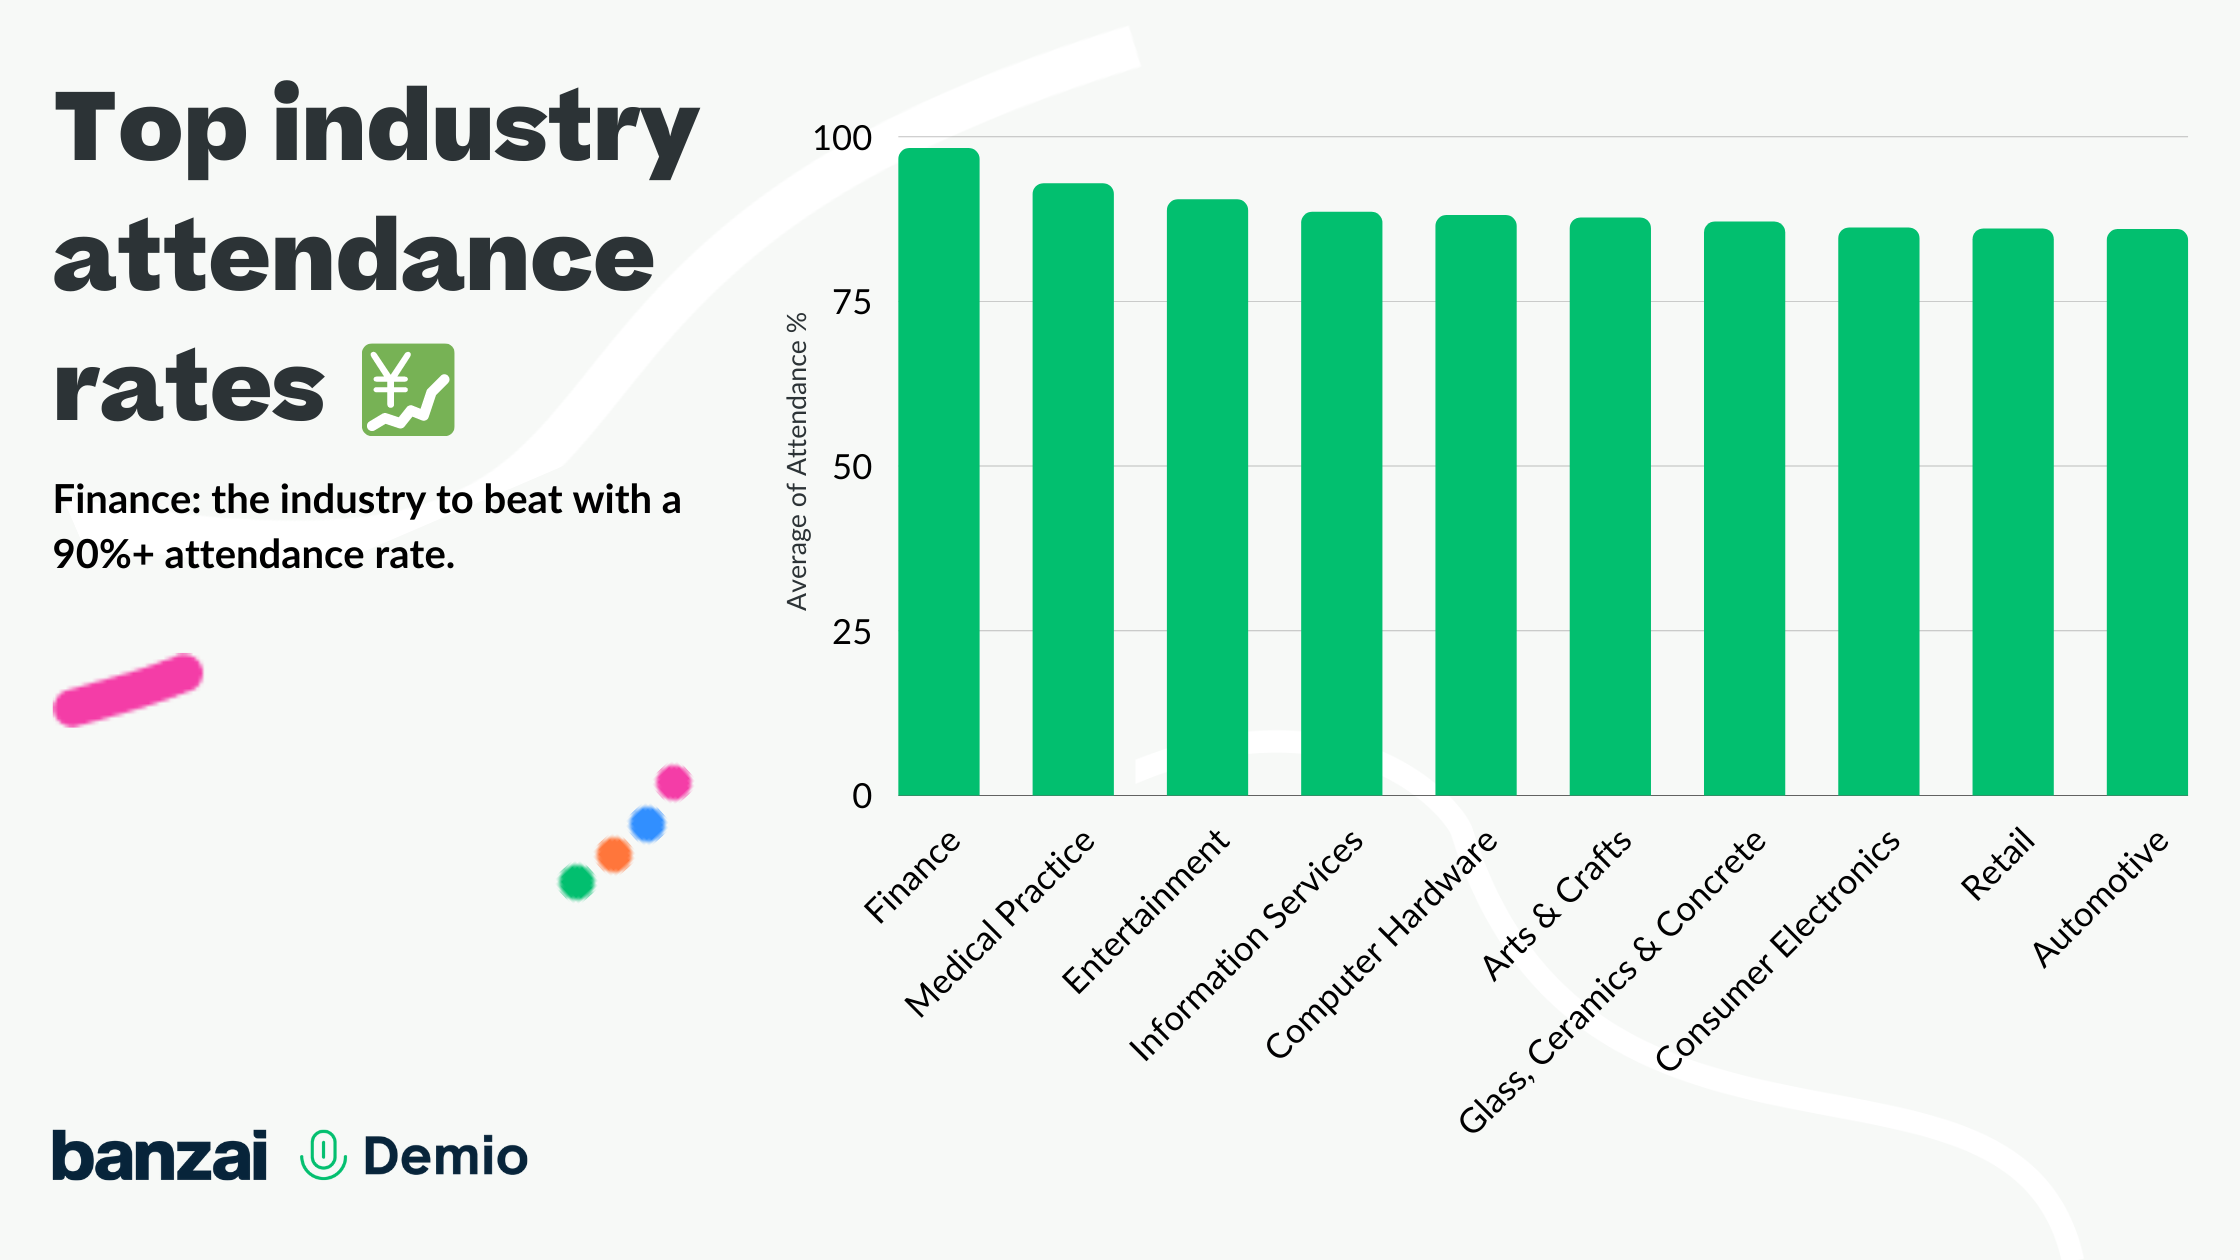 Which industry has the highest webinar attendance rate?